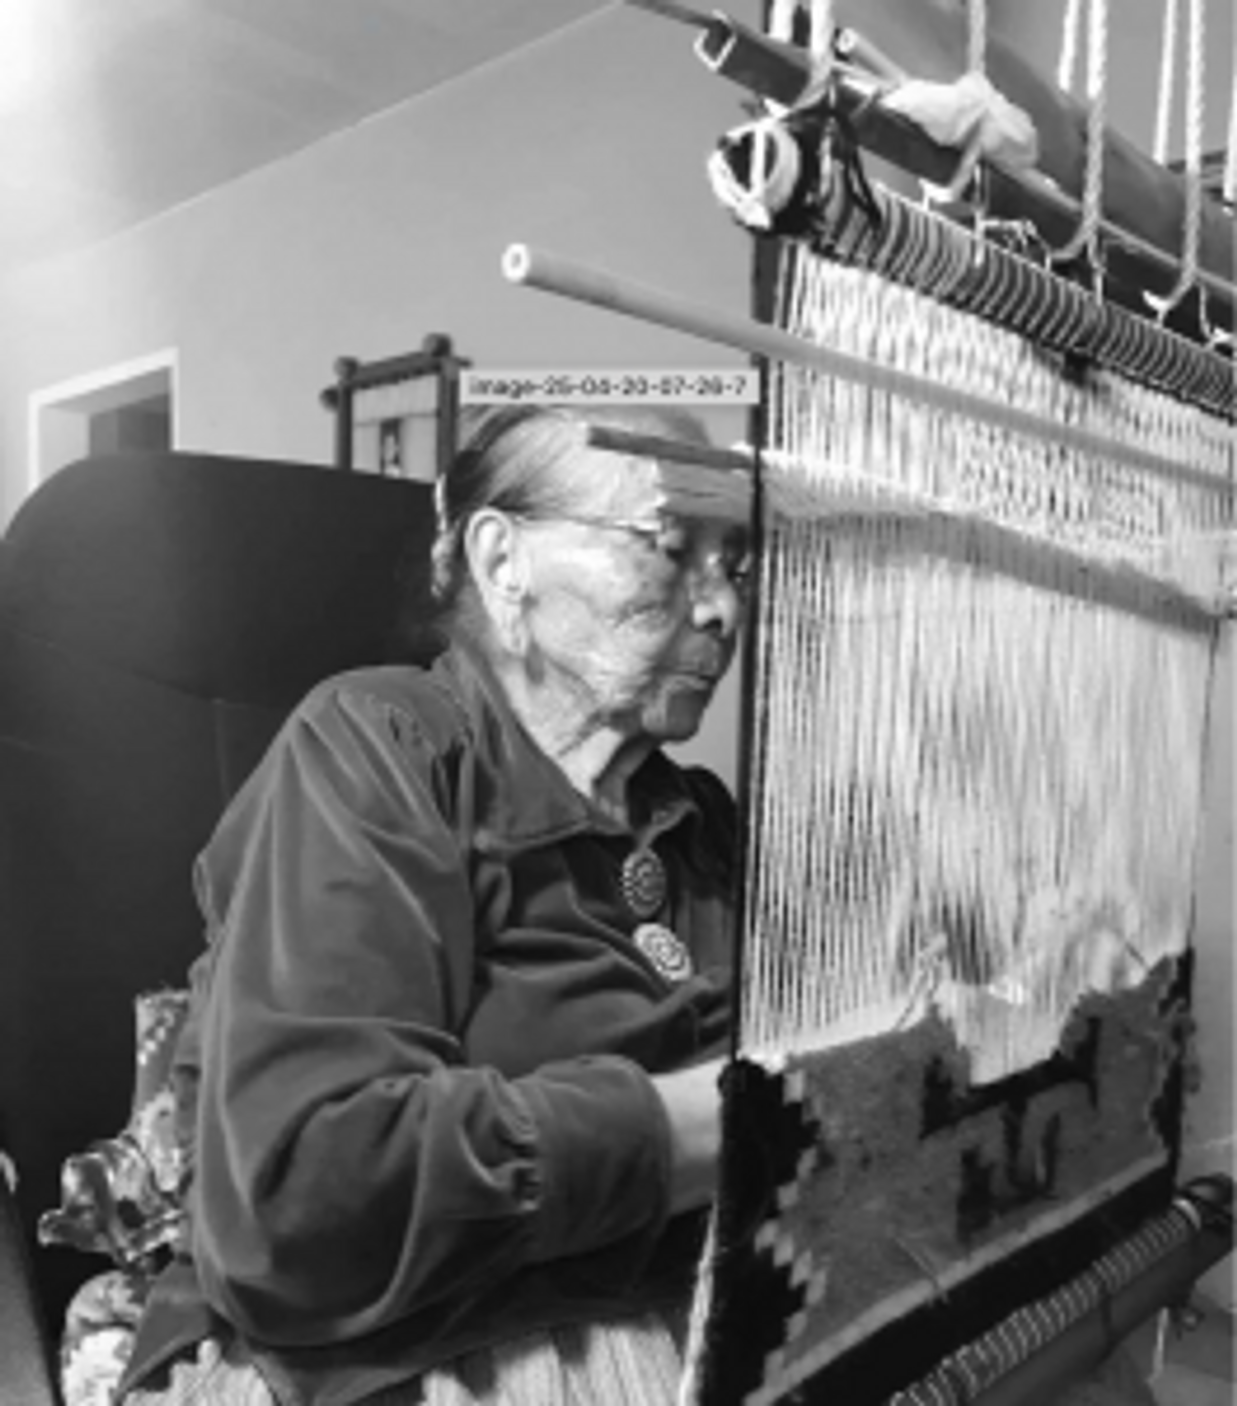 A photo of Bilagody weaving her last rug in 2017 before retiring from the craft